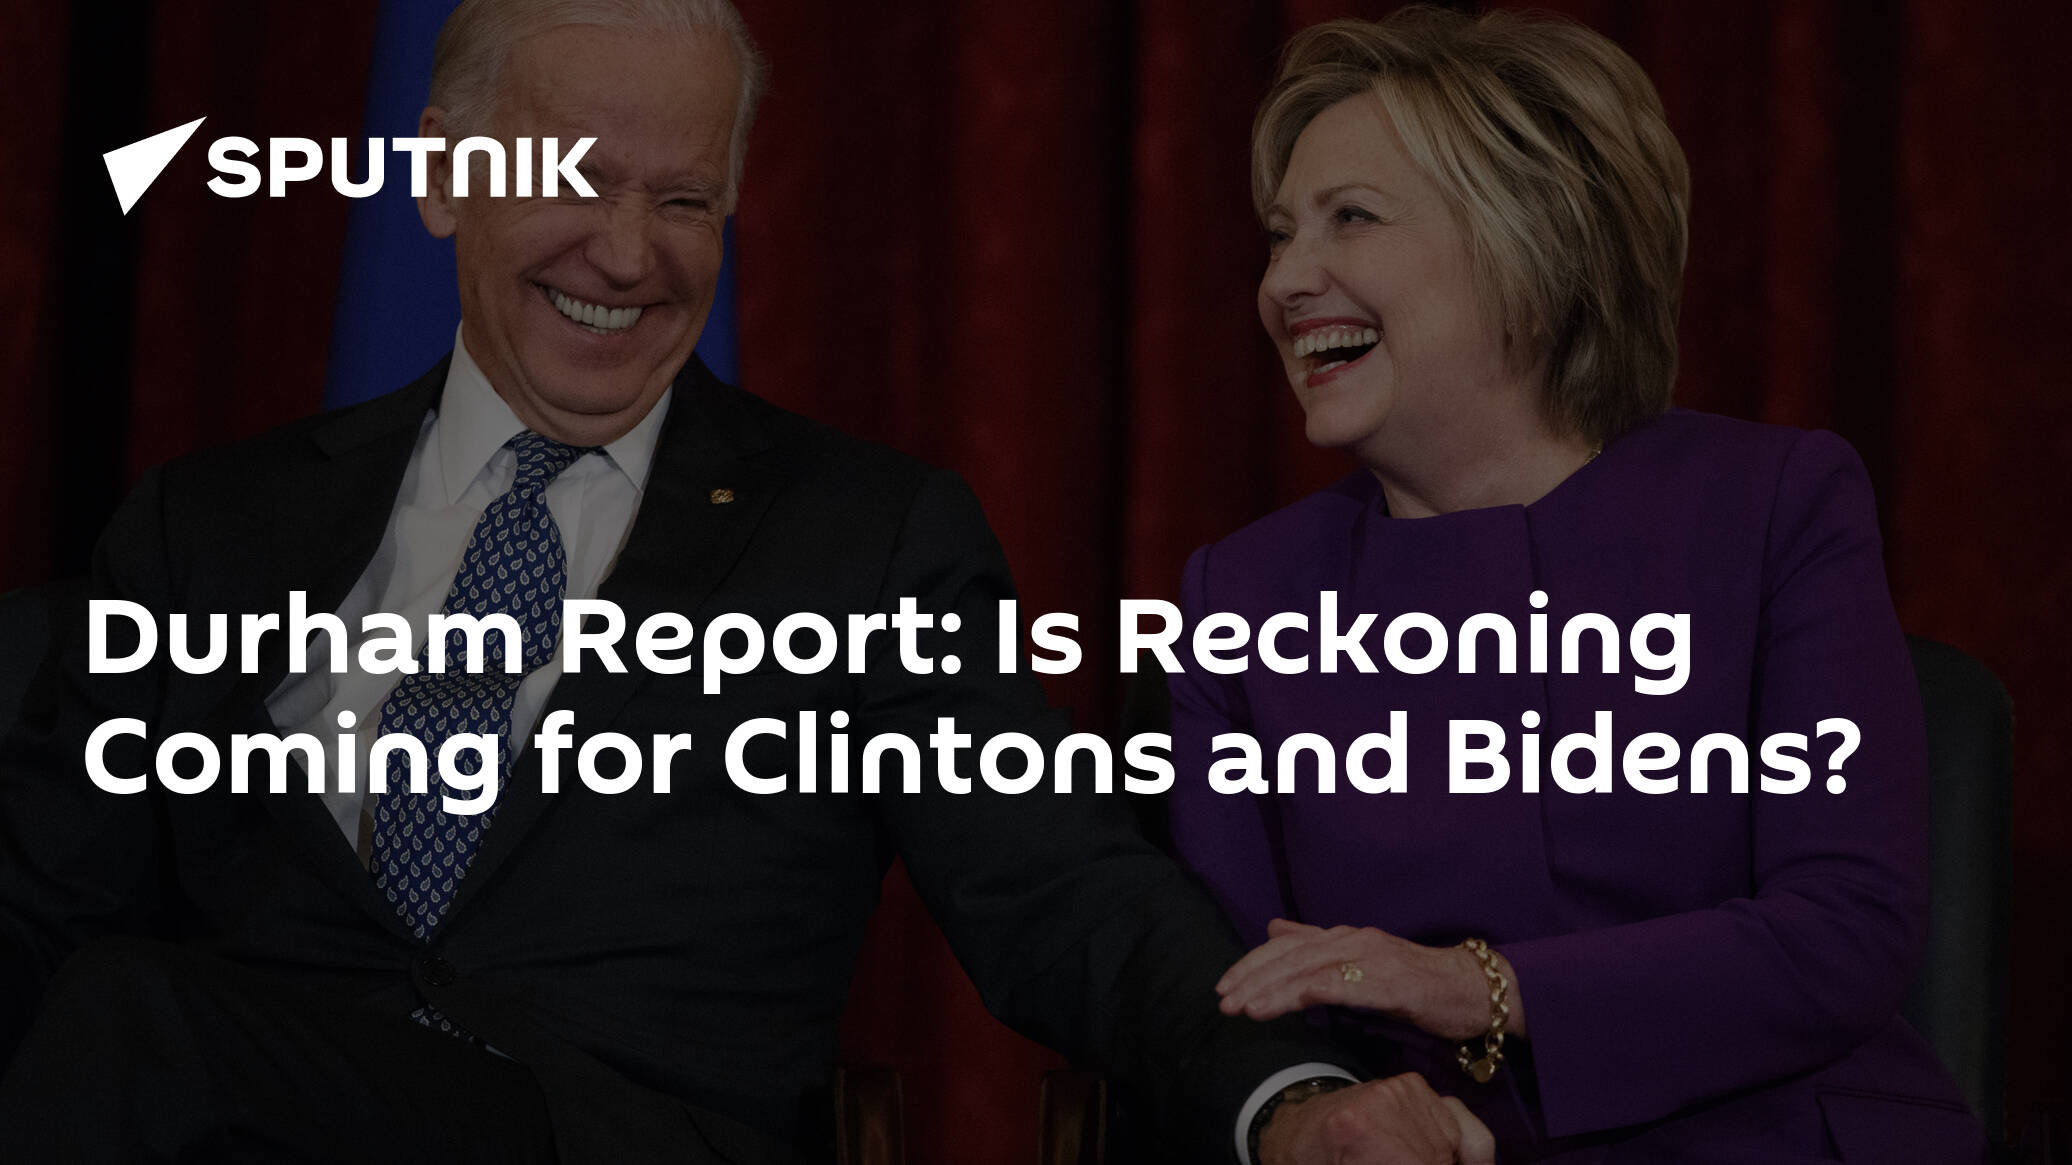 Durham Report: Is Reckoning Coming for Clintons and Bidens?